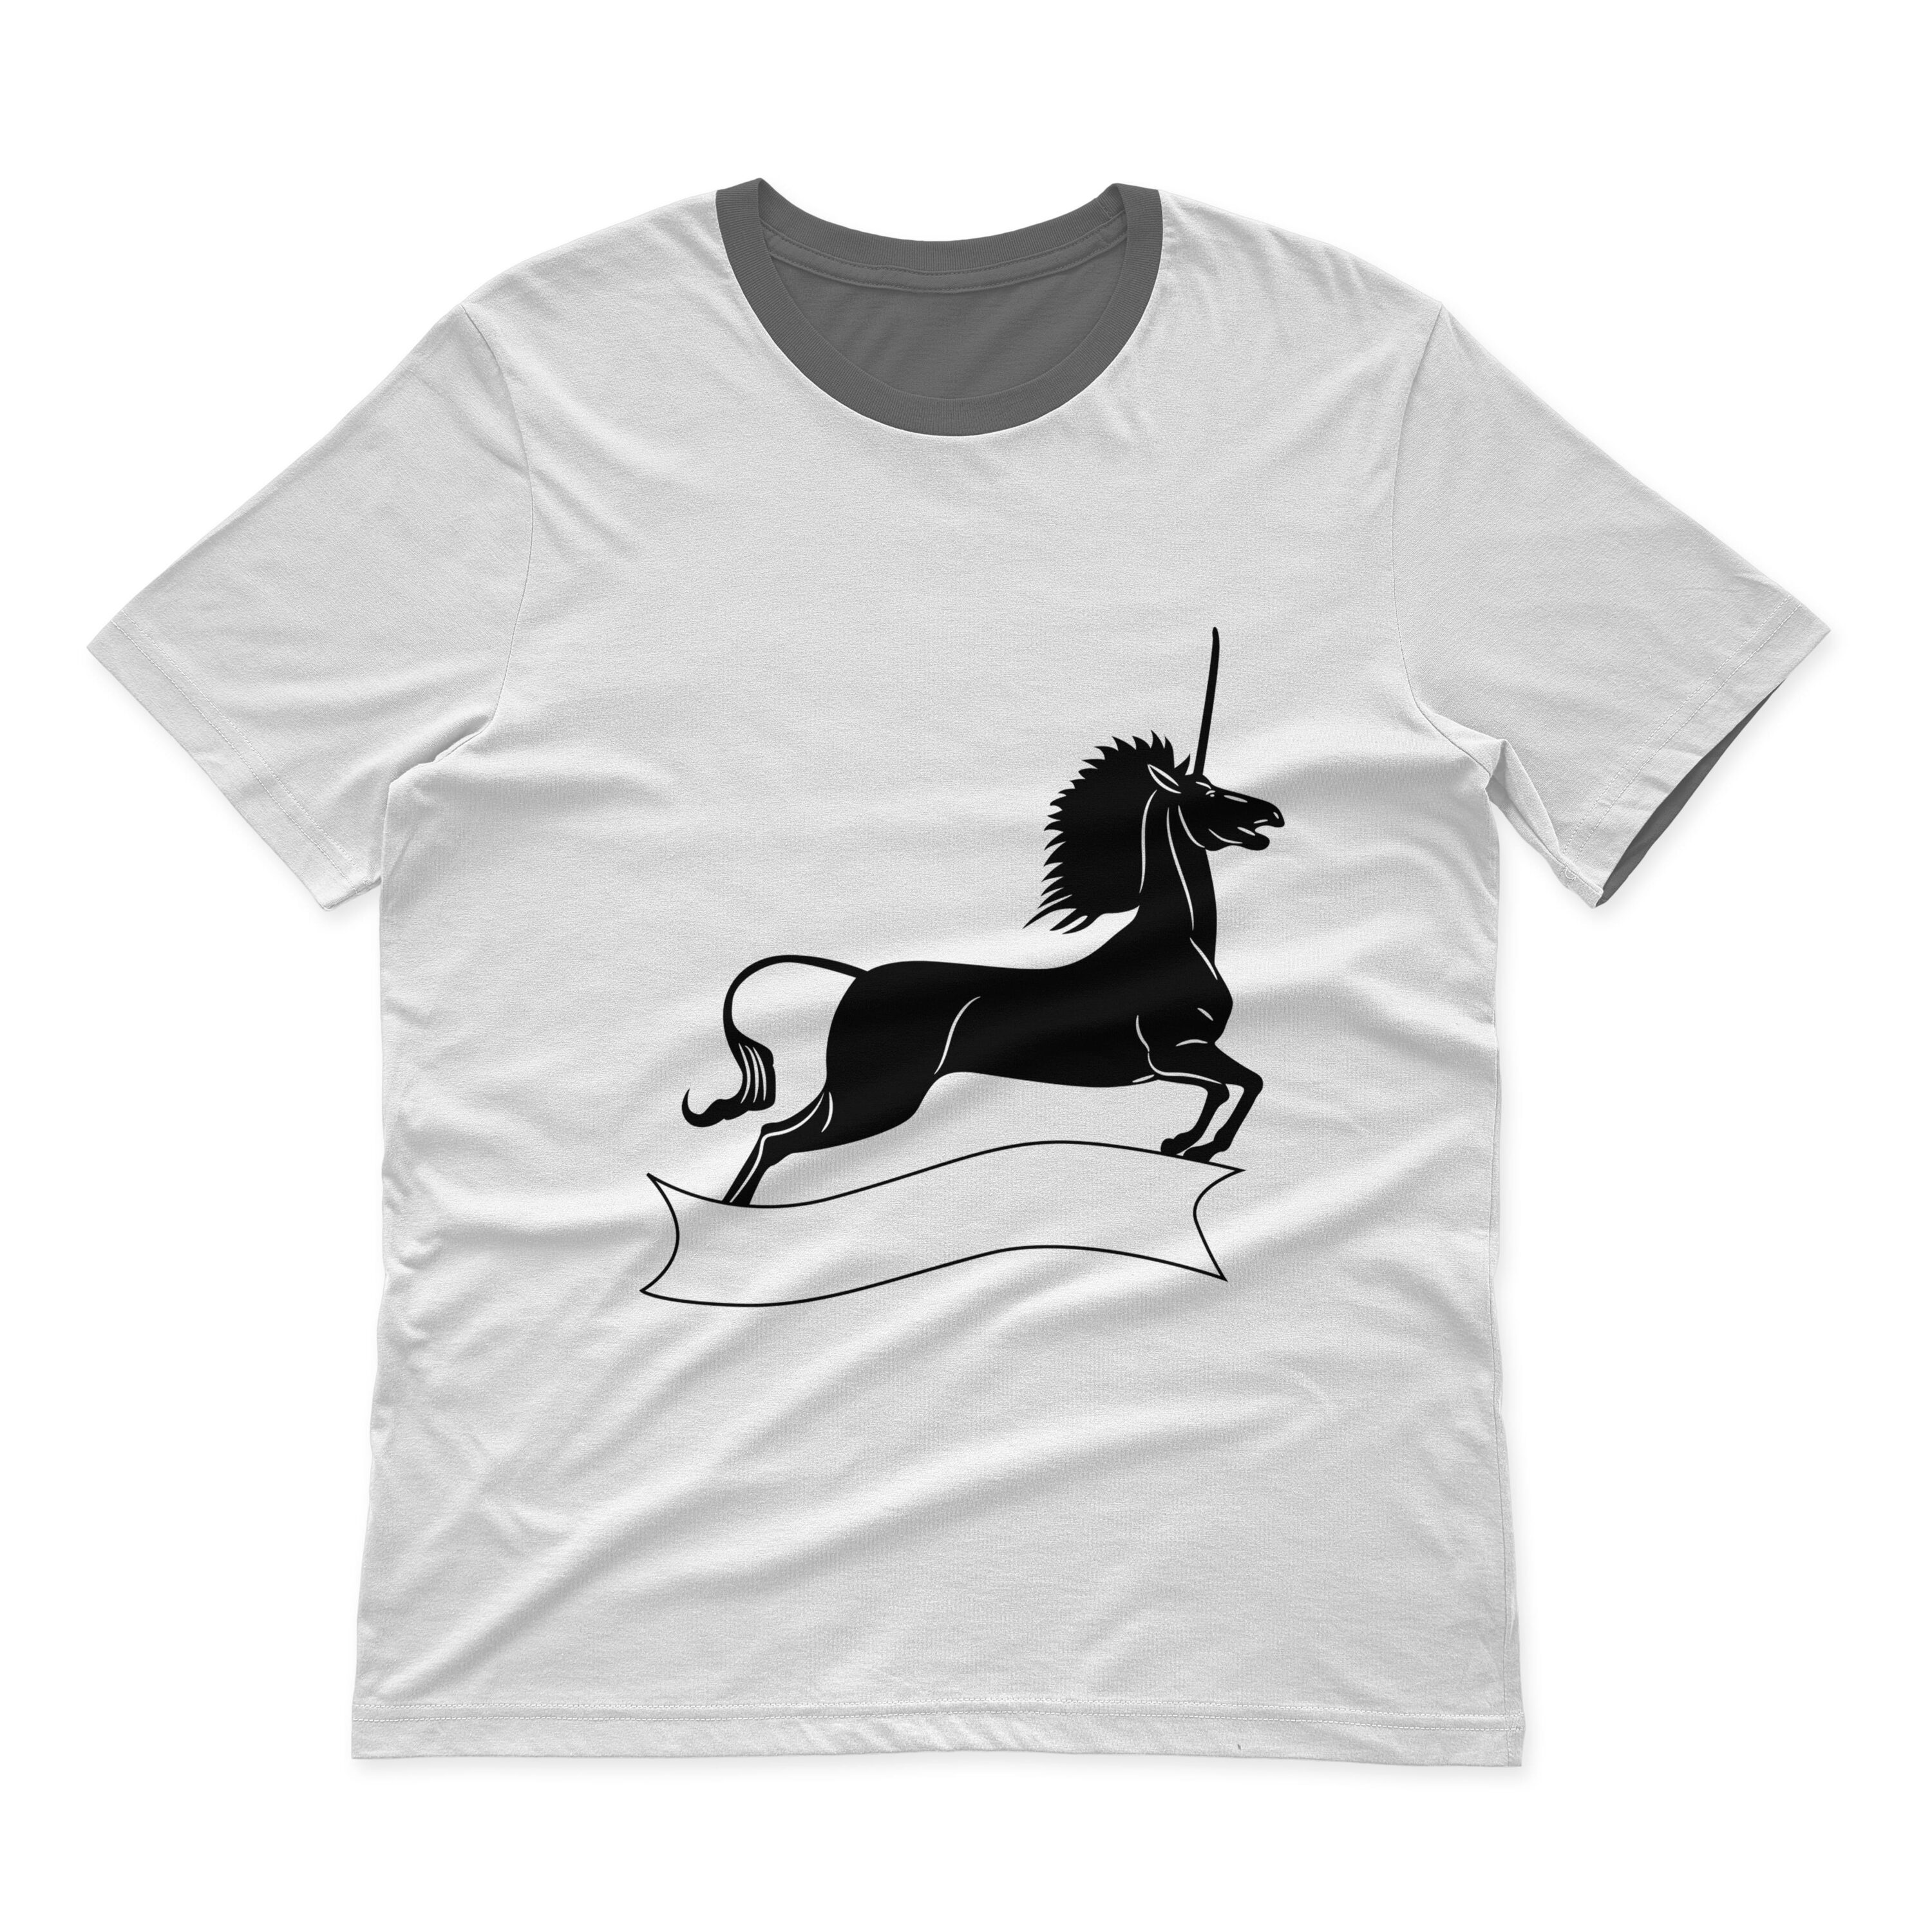 Gray t-shirt with a dark gray collar and a unicorn monogram on a white background.